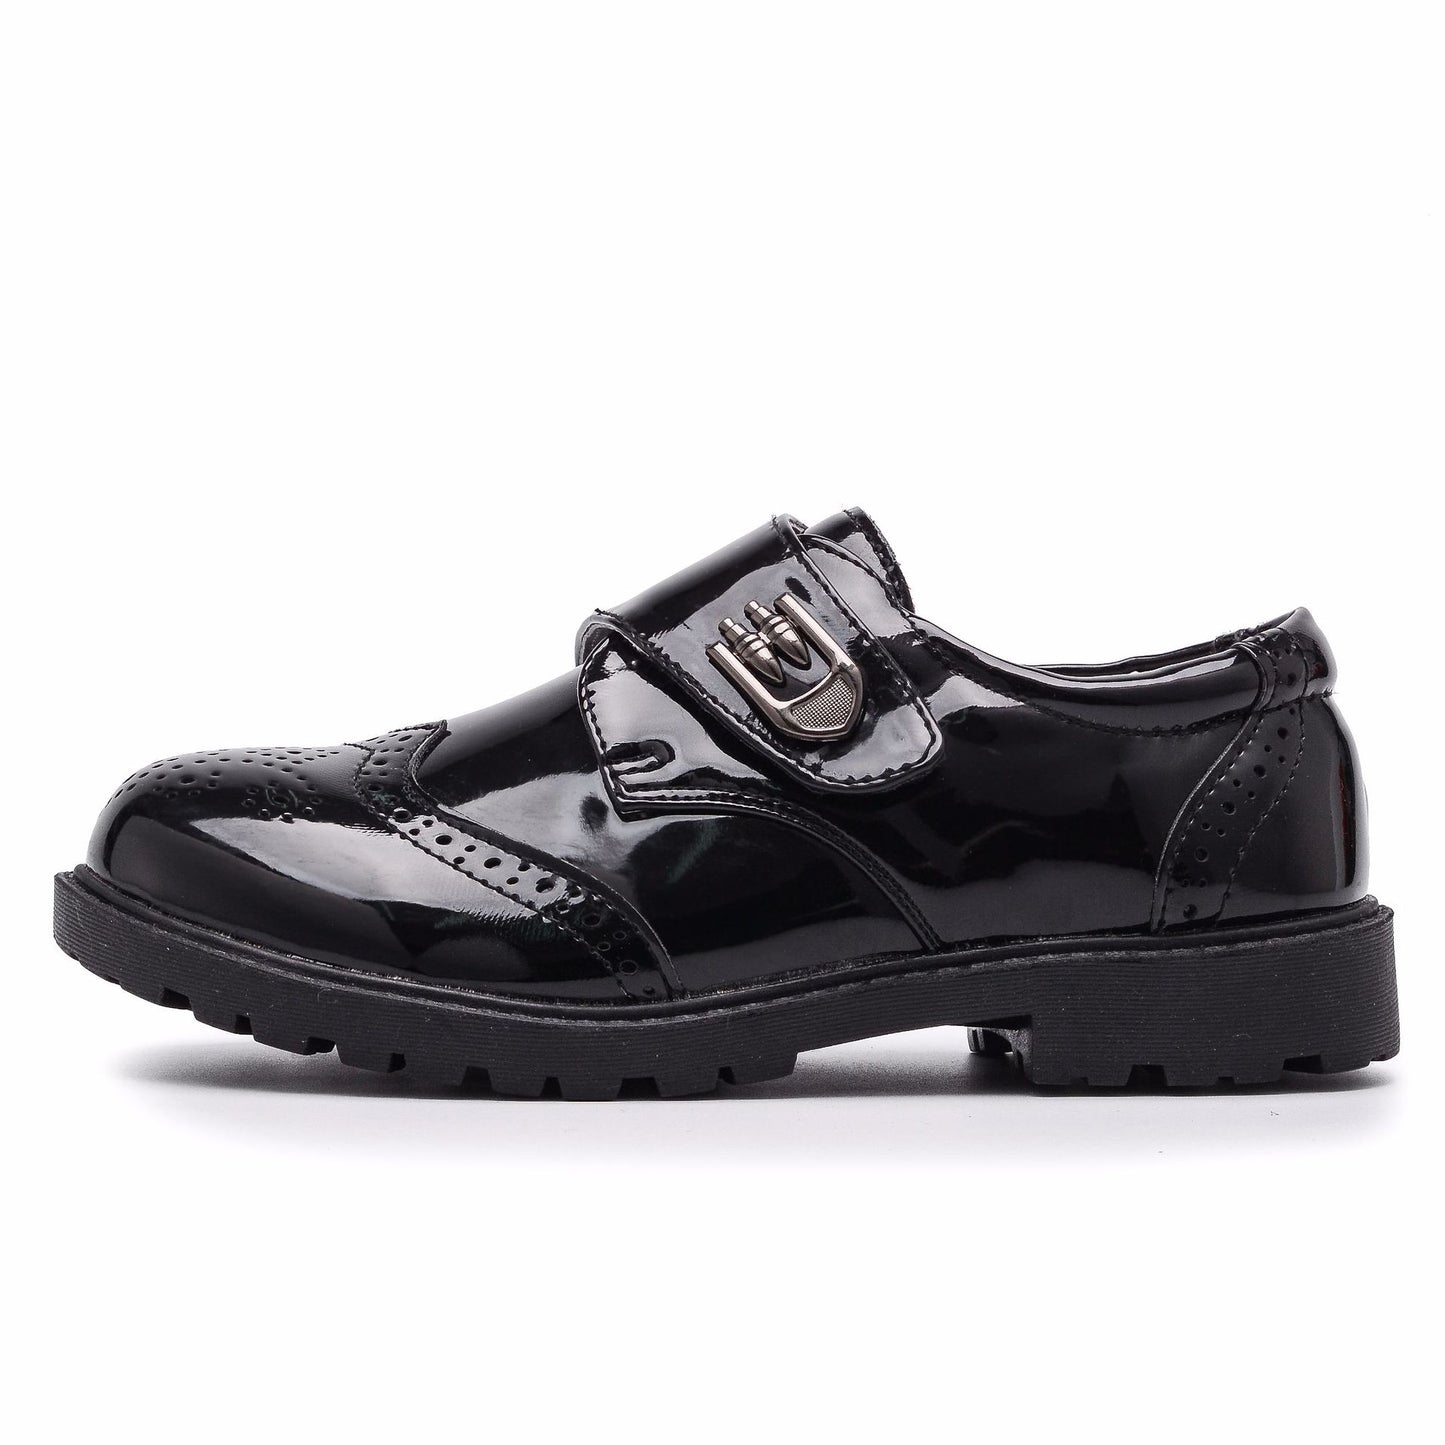 Boys' Leather Student Performance Shoes